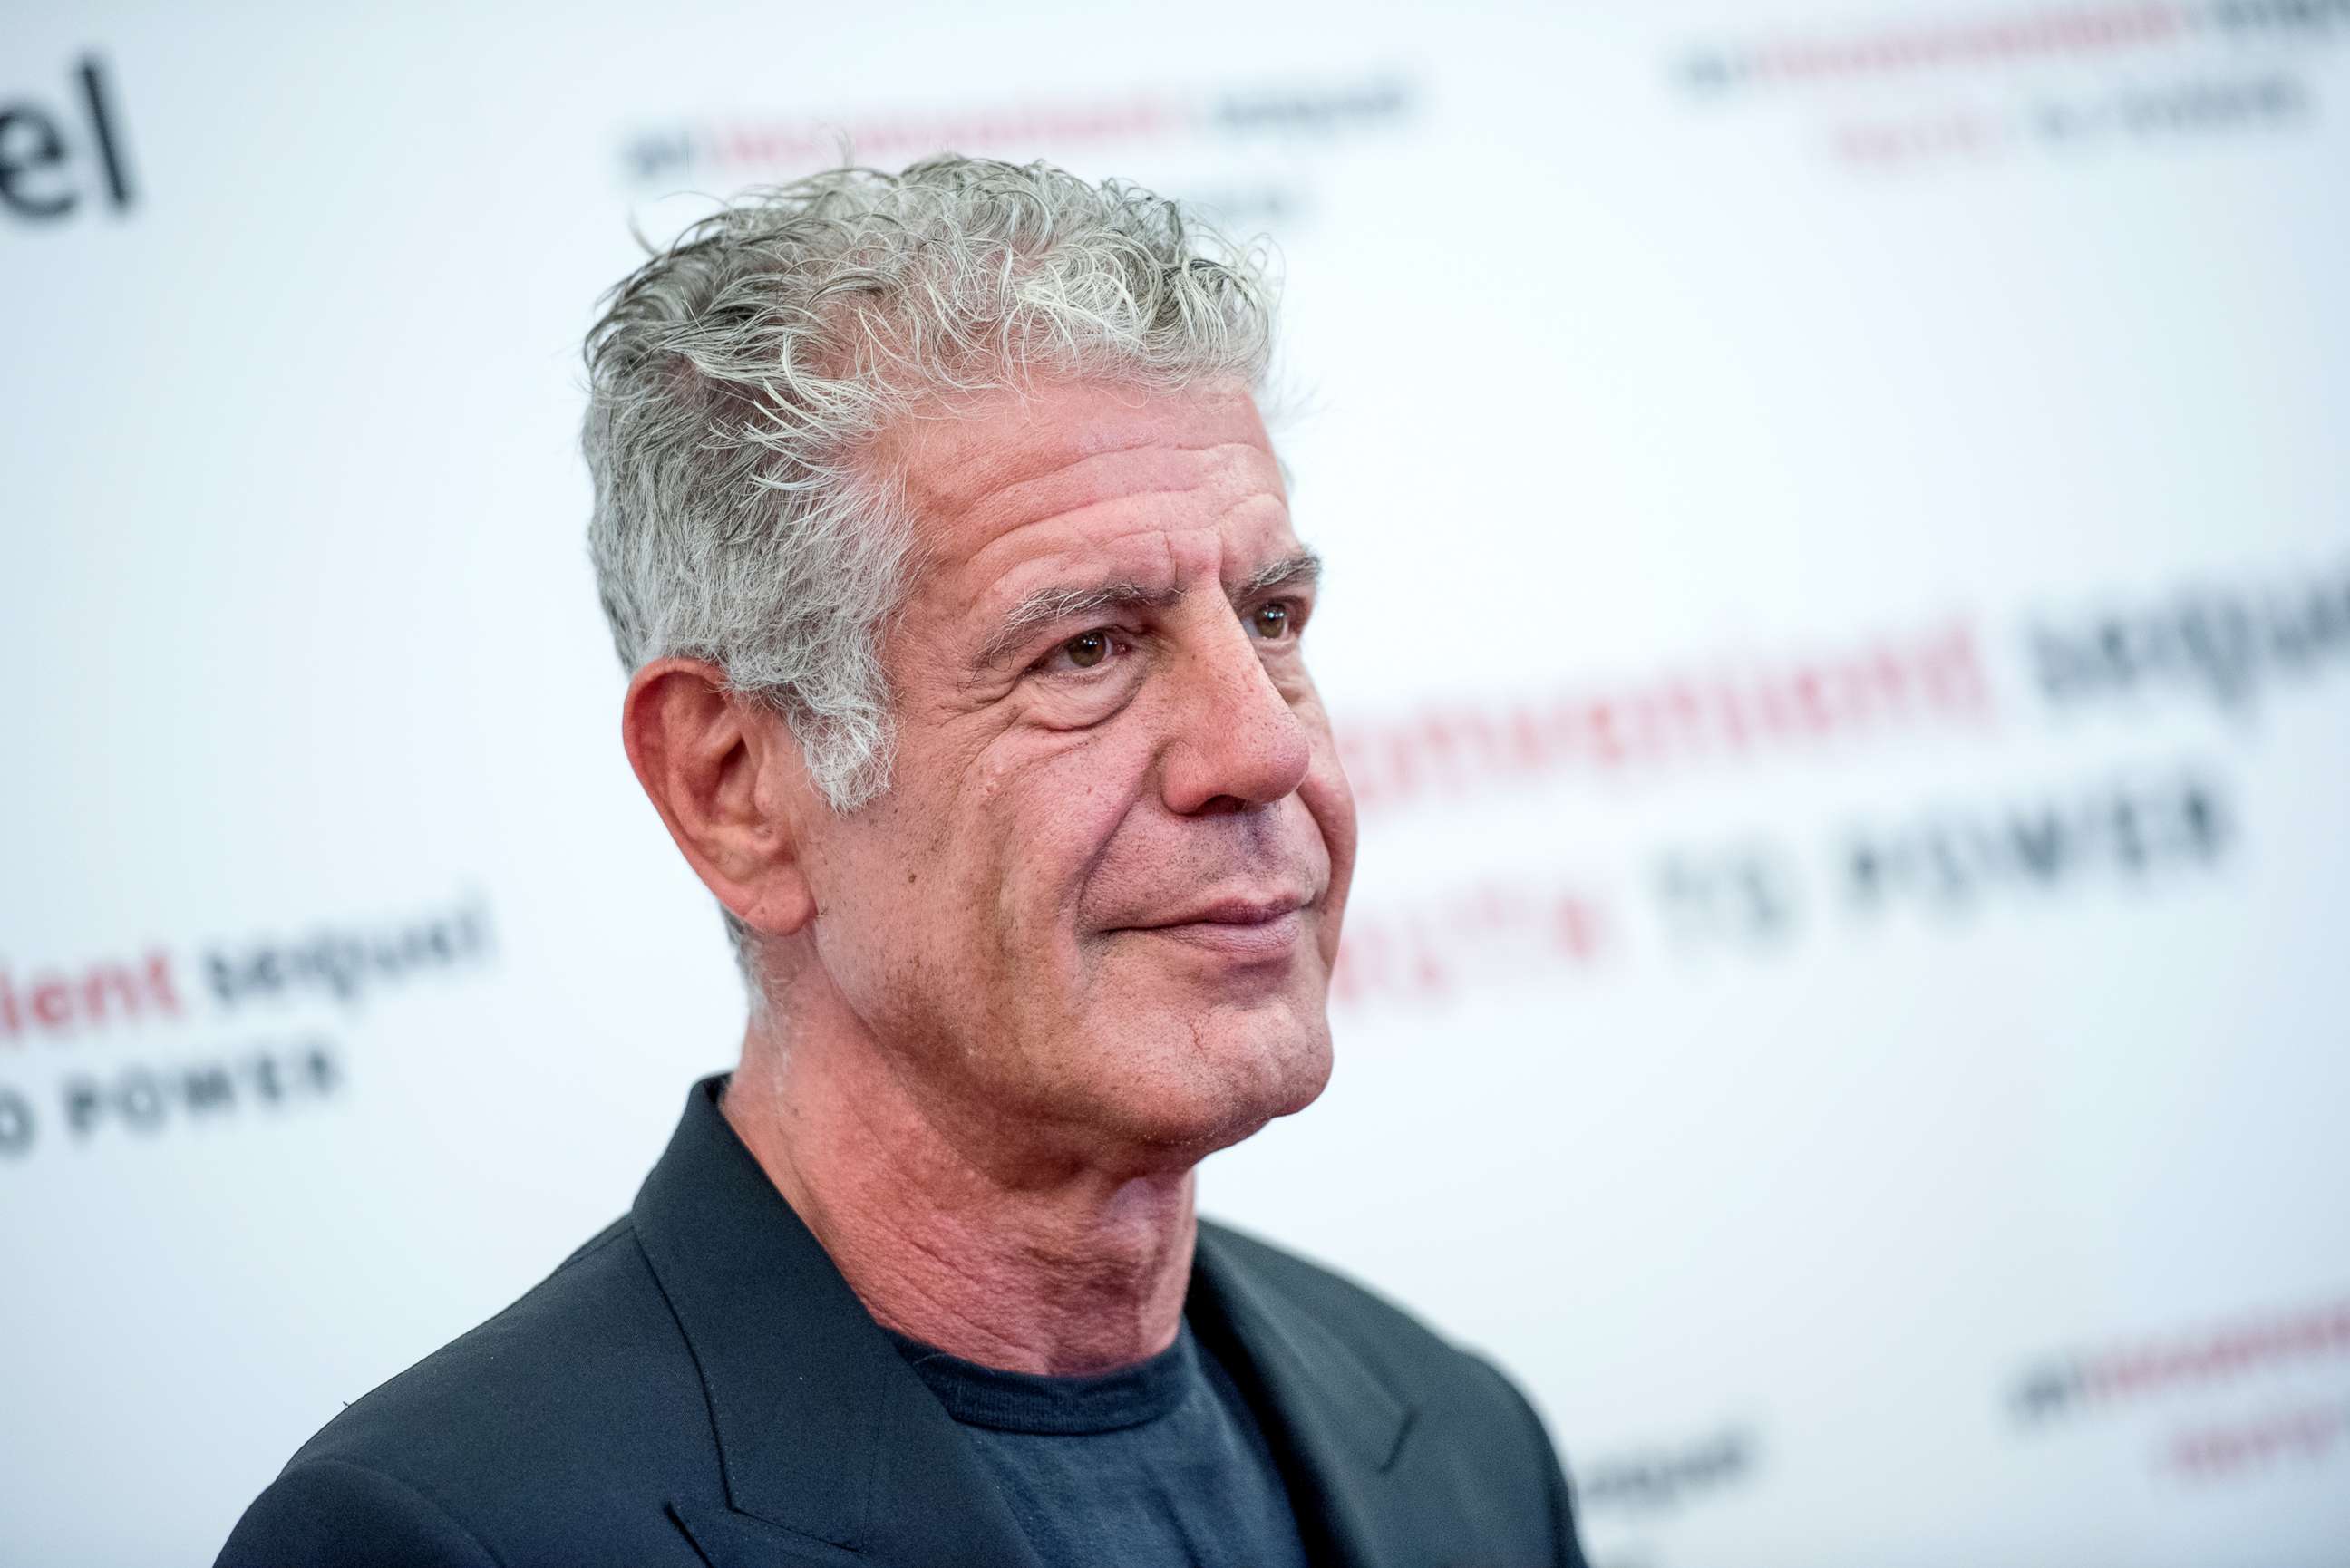 PHOTO: Anthony Bourdain attends "An Inconvenient Sequel: Truth To Power" New York screening at the Whitby Hotel, July 17, 2017, in New York City.